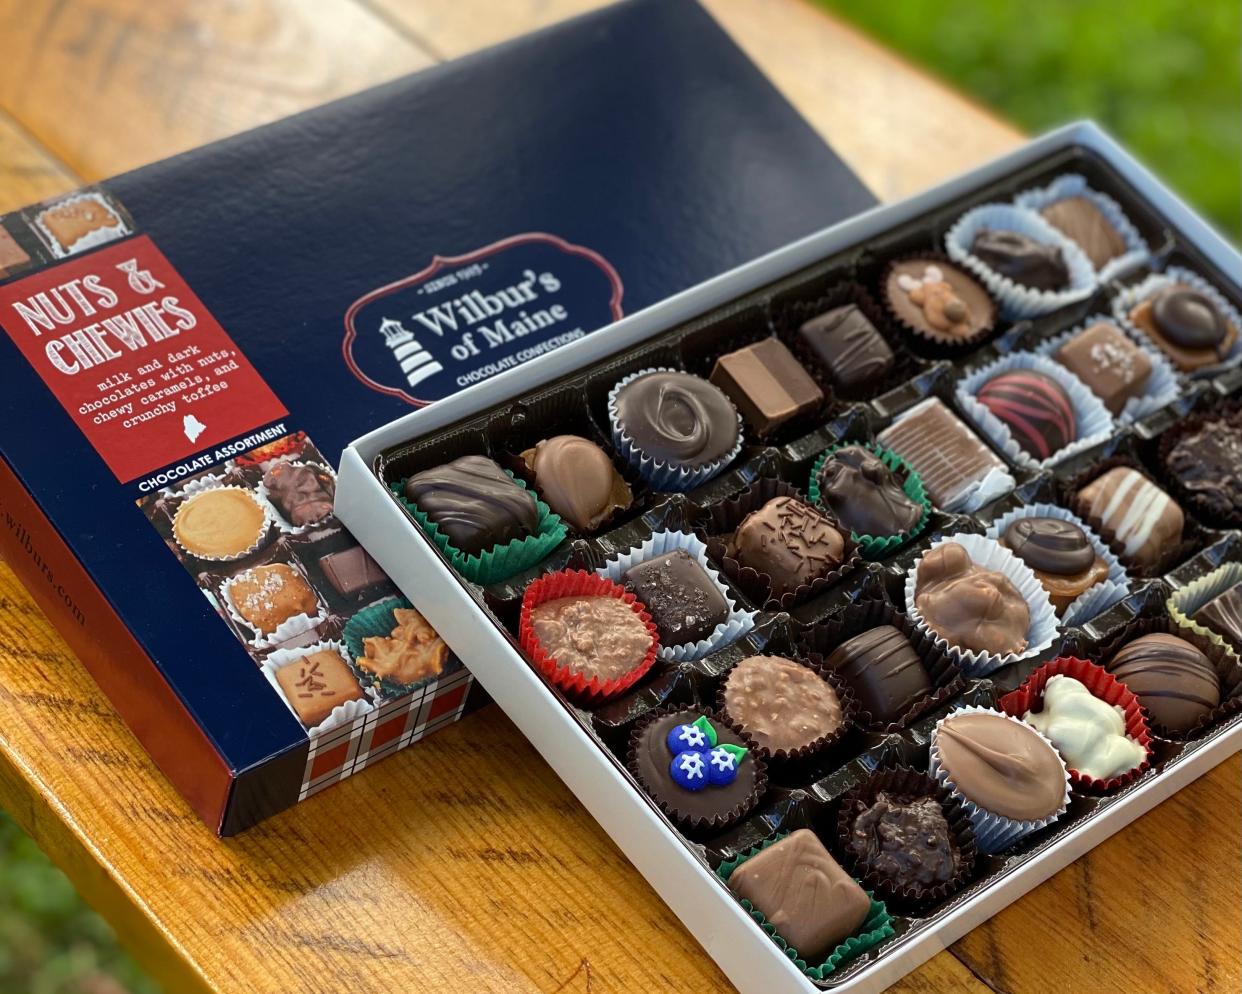 Chocolate assortment from Wilbur's of Maine